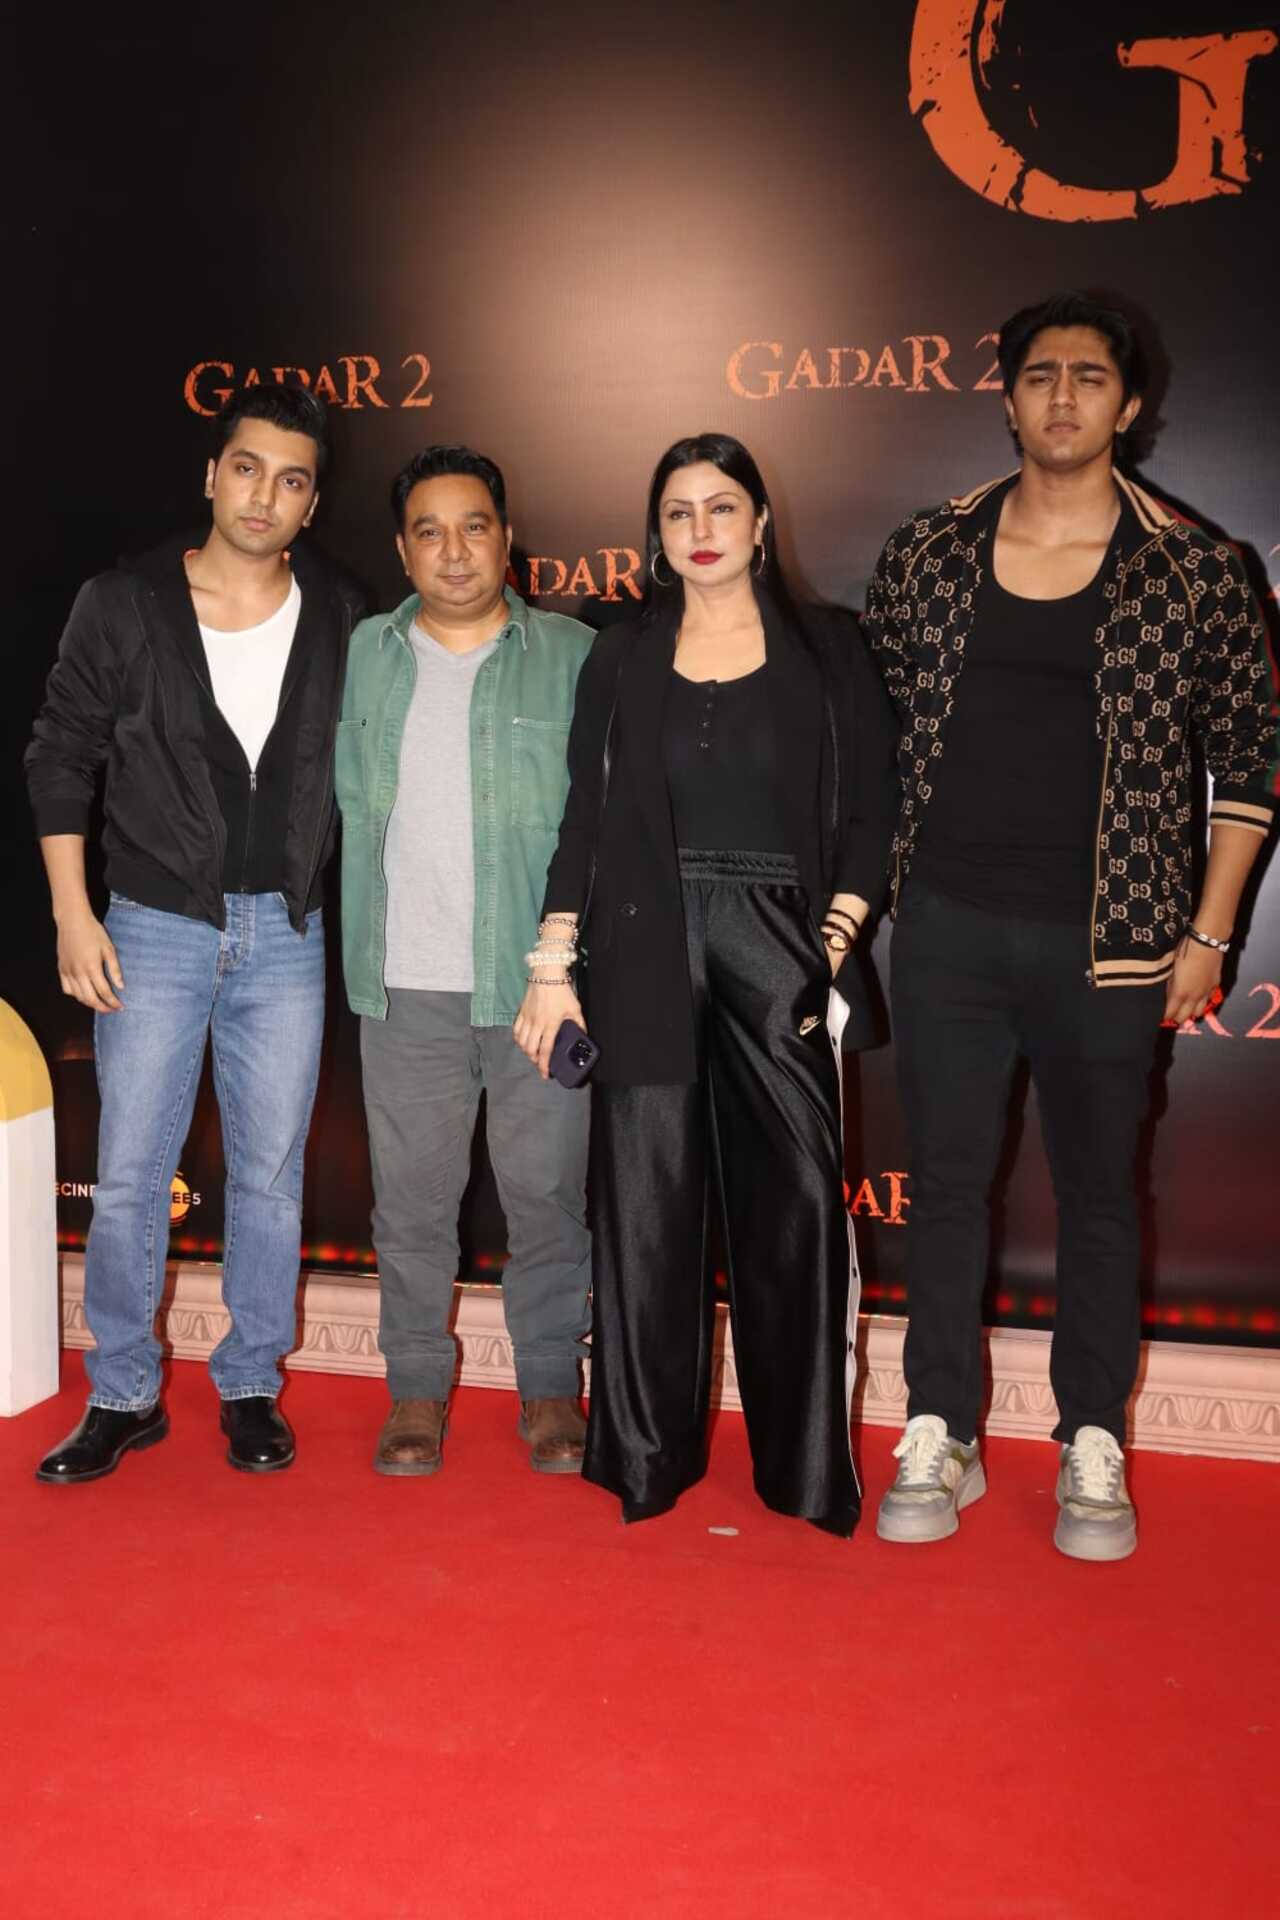 Filmmaker and choreographer Ahmed Khan at the screening with his family